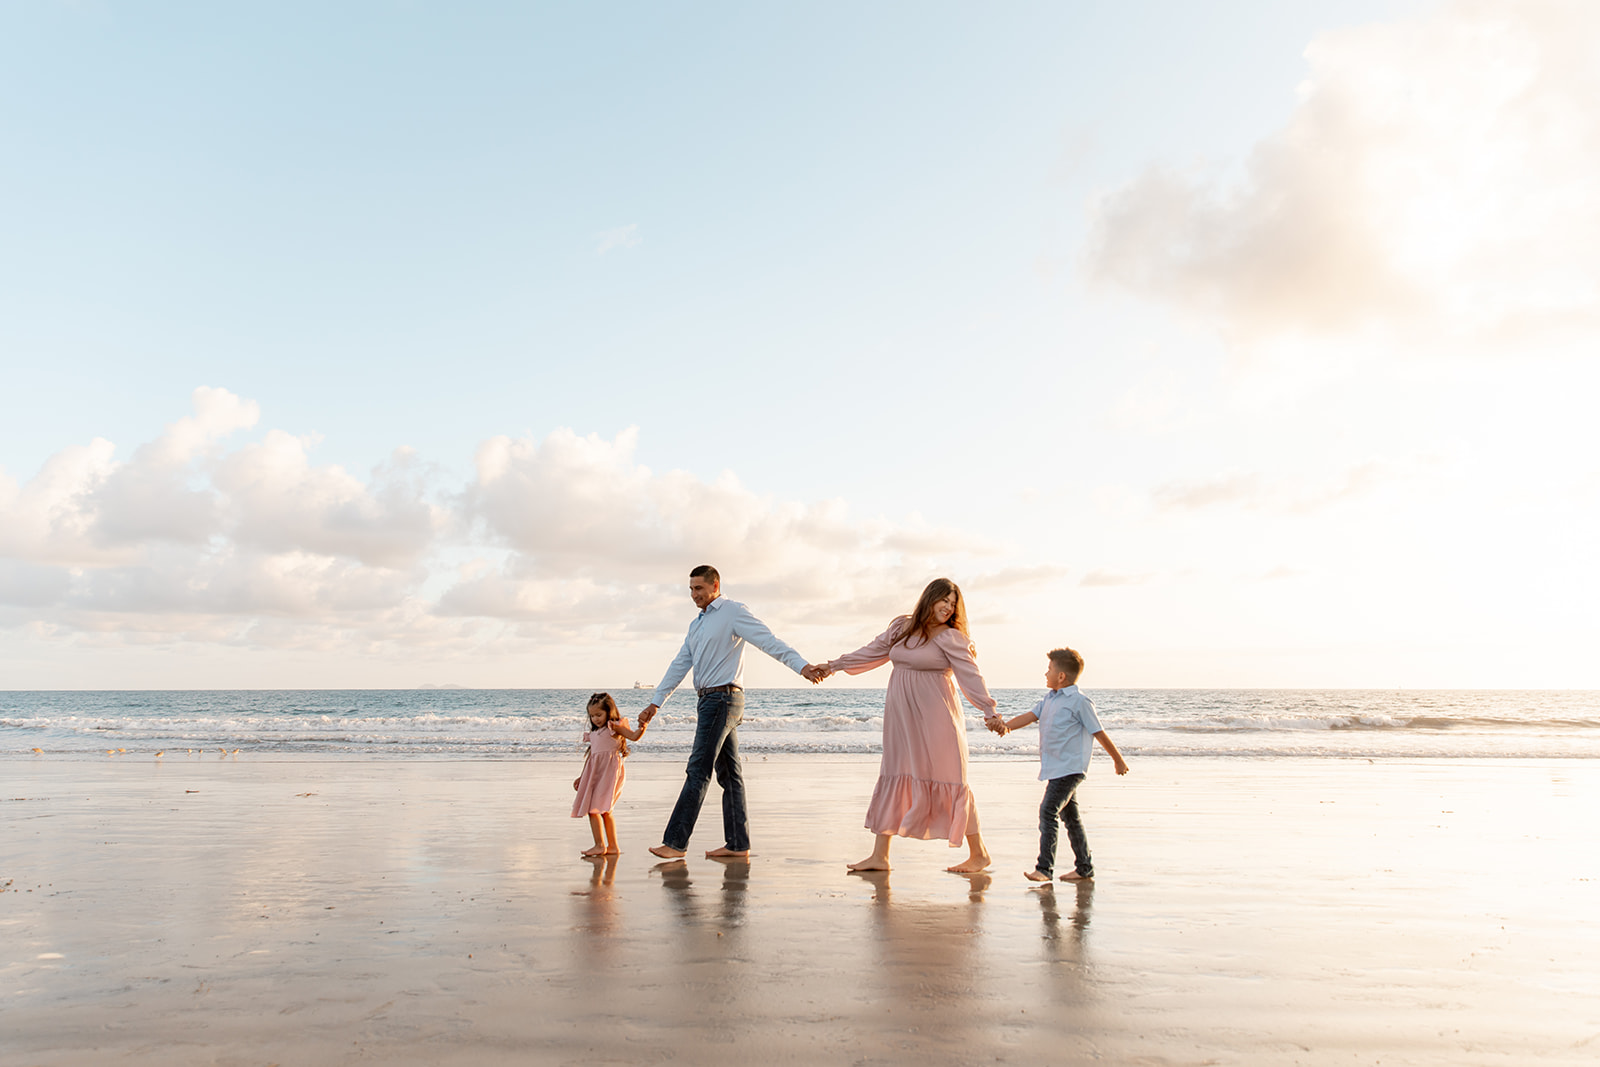 A mom and dad in a pink dress and blue shirt walk hand in hand with their young daughter and son in matching outfits to theirs down a beach at sunset after visiting San Diego Pediatricians